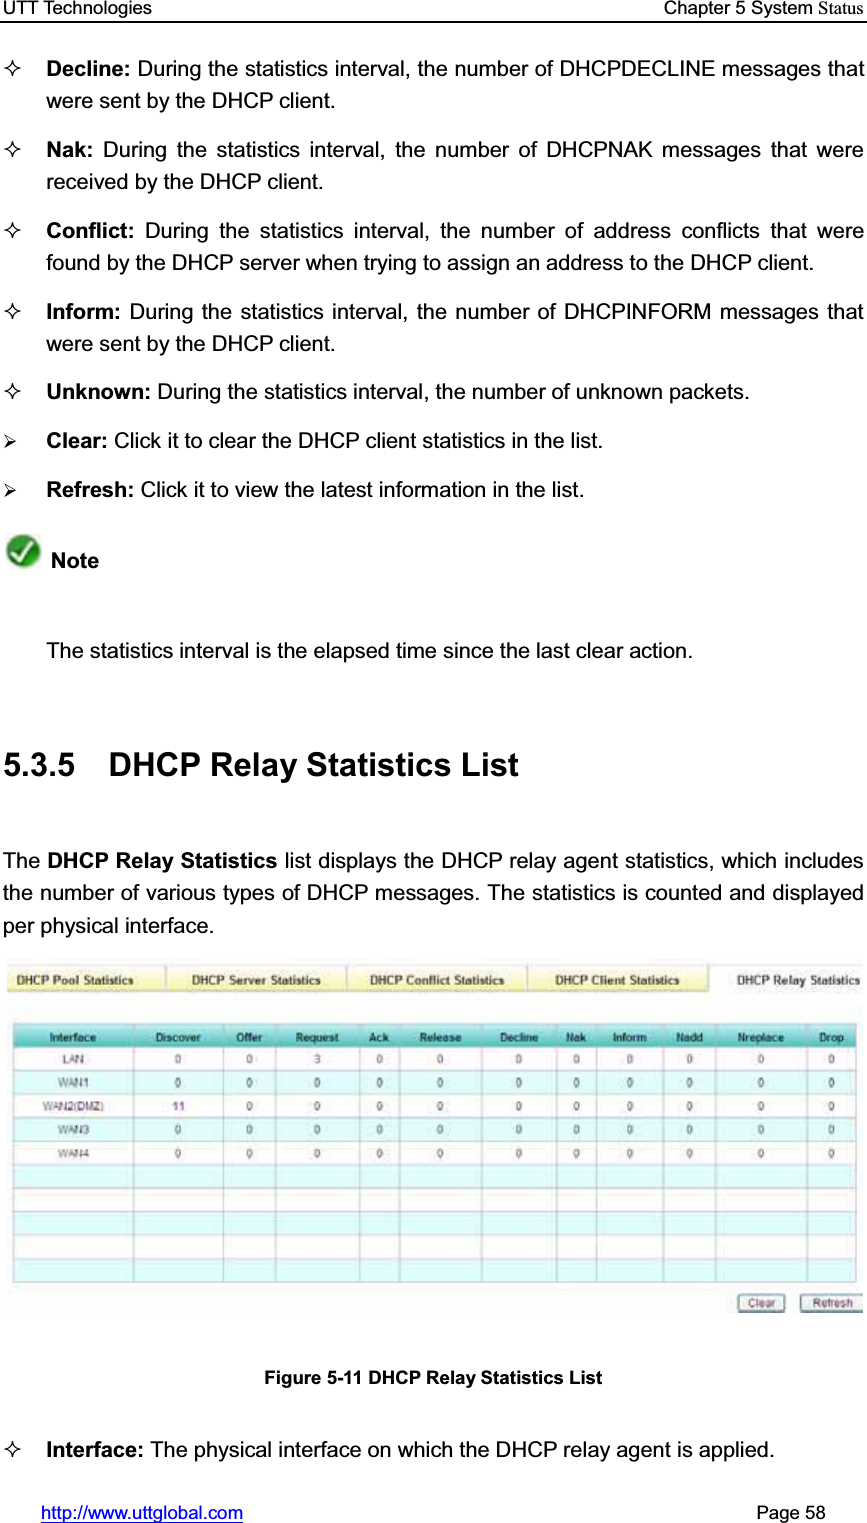 UTT Technologies    Chapter 5 System Statushttp://www.uttglobal.com                                                       Page 58 Decline: During the statistics interval, the number of DHCPDECLINE messages that were sent by the DHCP client. Nak:  During the statistics interval, the number of DHCPNAK messages that were received by the DHCP client. Conflict:  During the statistics interval, the number of address conflicts that were found by the DHCP server when trying to assign an address to the DHCP client. Inform: During the statistics interval, the number of DHCPINFORM messages that were sent by the DHCP client. Unknown: During the statistics interval, the number of unknown packets. ¾Clear: Click it to clear the DHCP client statistics in the list.¾Refresh: Click it to view the latest information in the list.NoteThe statistics interval is the elapsed time since the last clear action. 5.3.5  DHCP Relay Statistics List The DHCP Relay Statistics list displays the DHCP relay agent statistics, which includes the number of various types of DHCP messages. The statistics is counted and displayedper physical interface. Figure 5-11 DHCP Relay Statistics List Interface: The physical interface on which the DHCP relay agent is applied.